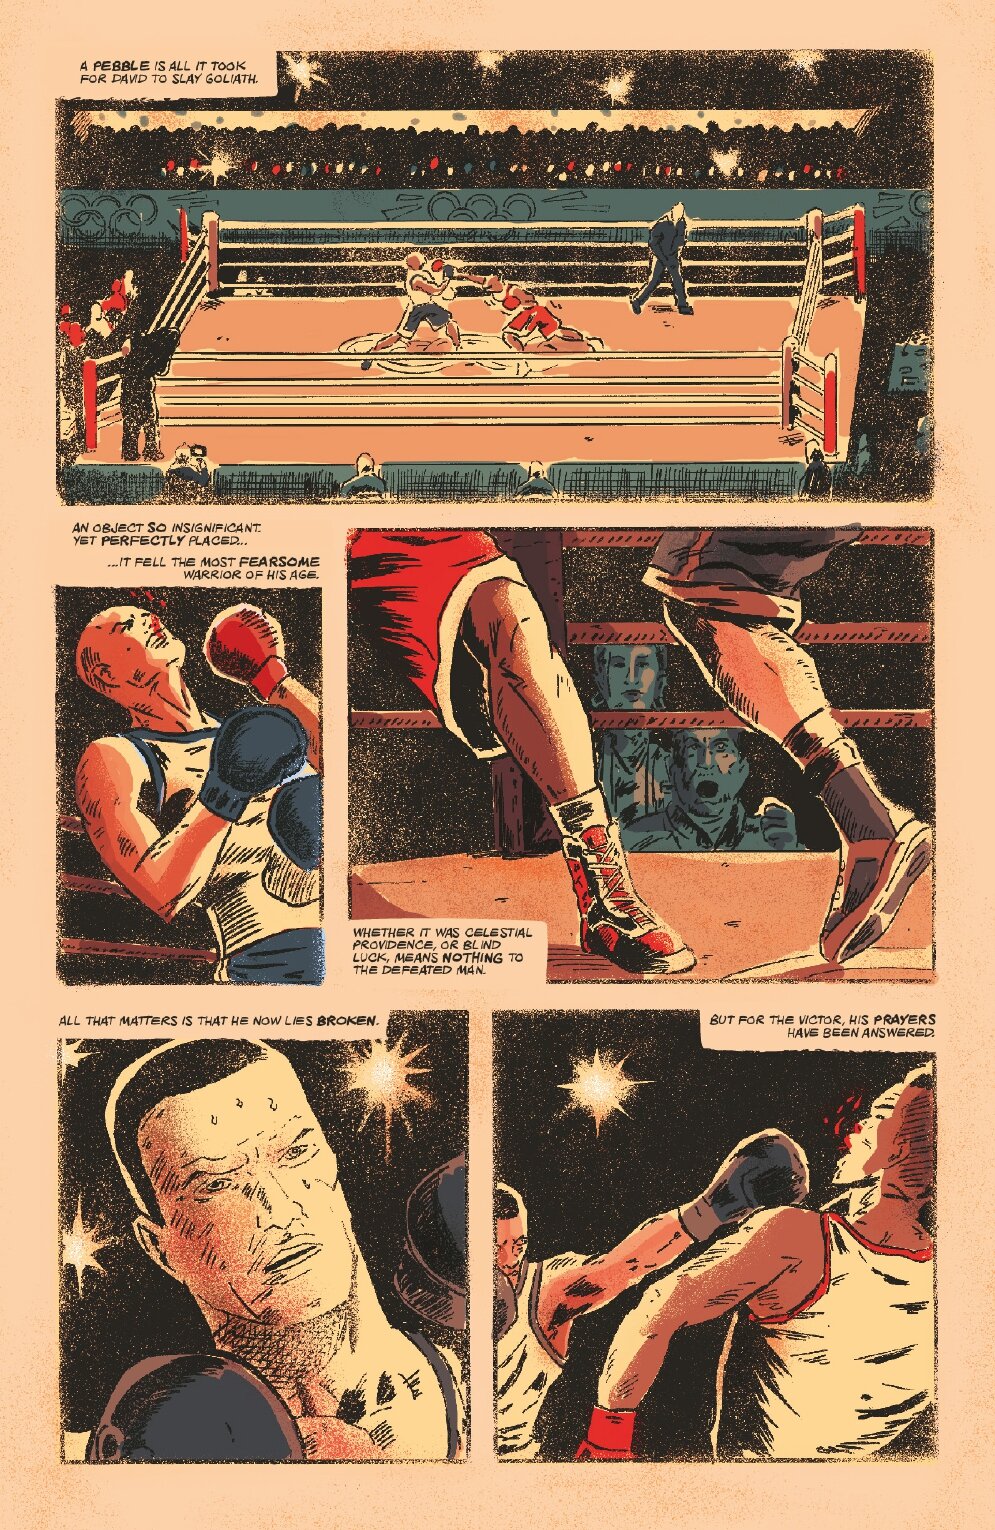 A Boxer Pitch Pages_page-0003.jpg